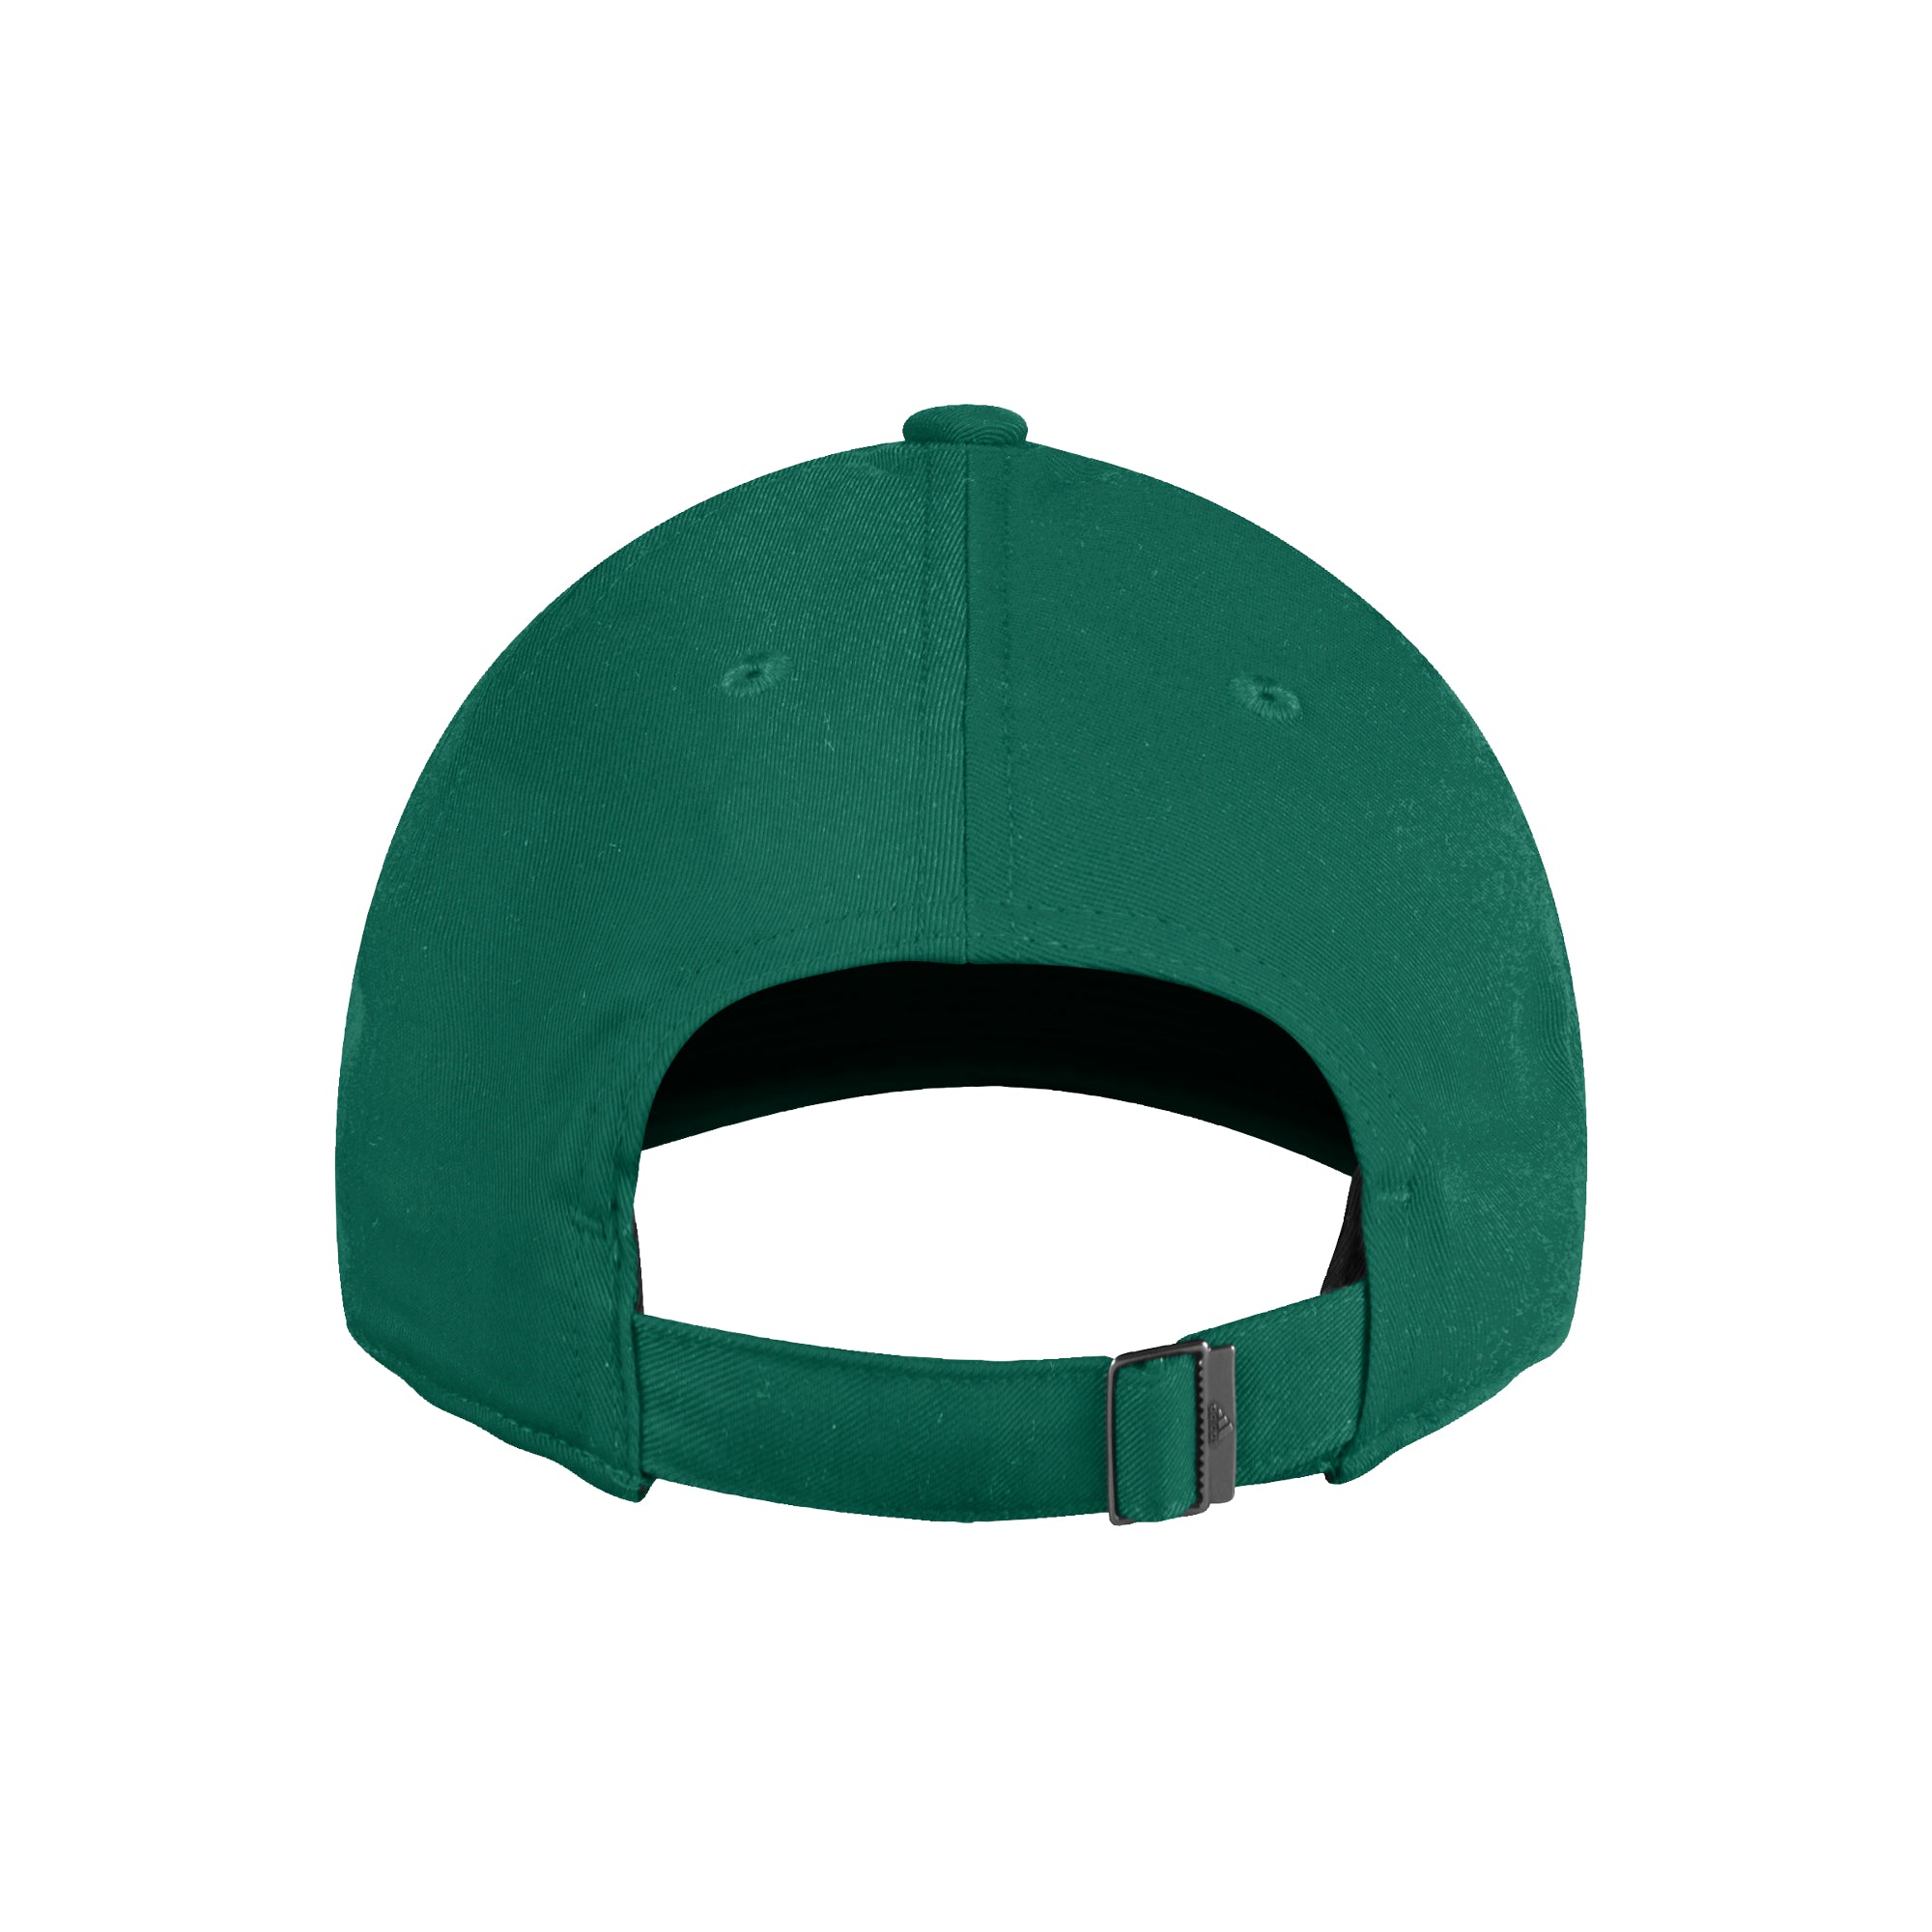 Miami Hurricanes adidas Old English M Adjustable Slouch Hat - White/Green